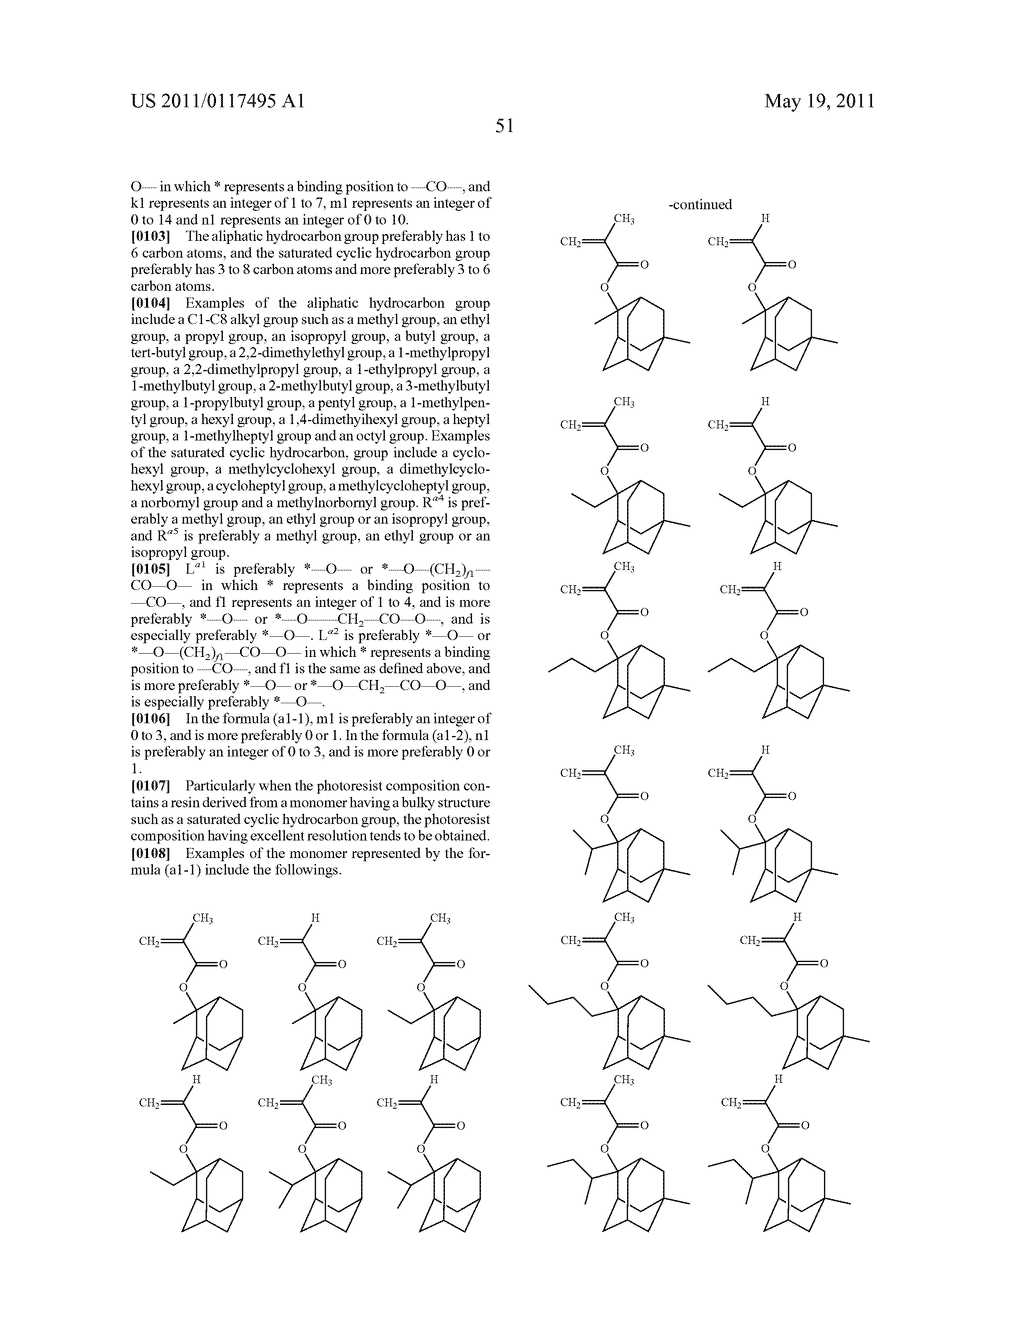 SALT AND PHOTORESIST COMPOSITION CONTAINING THE SAME - diagram, schematic, and image 52